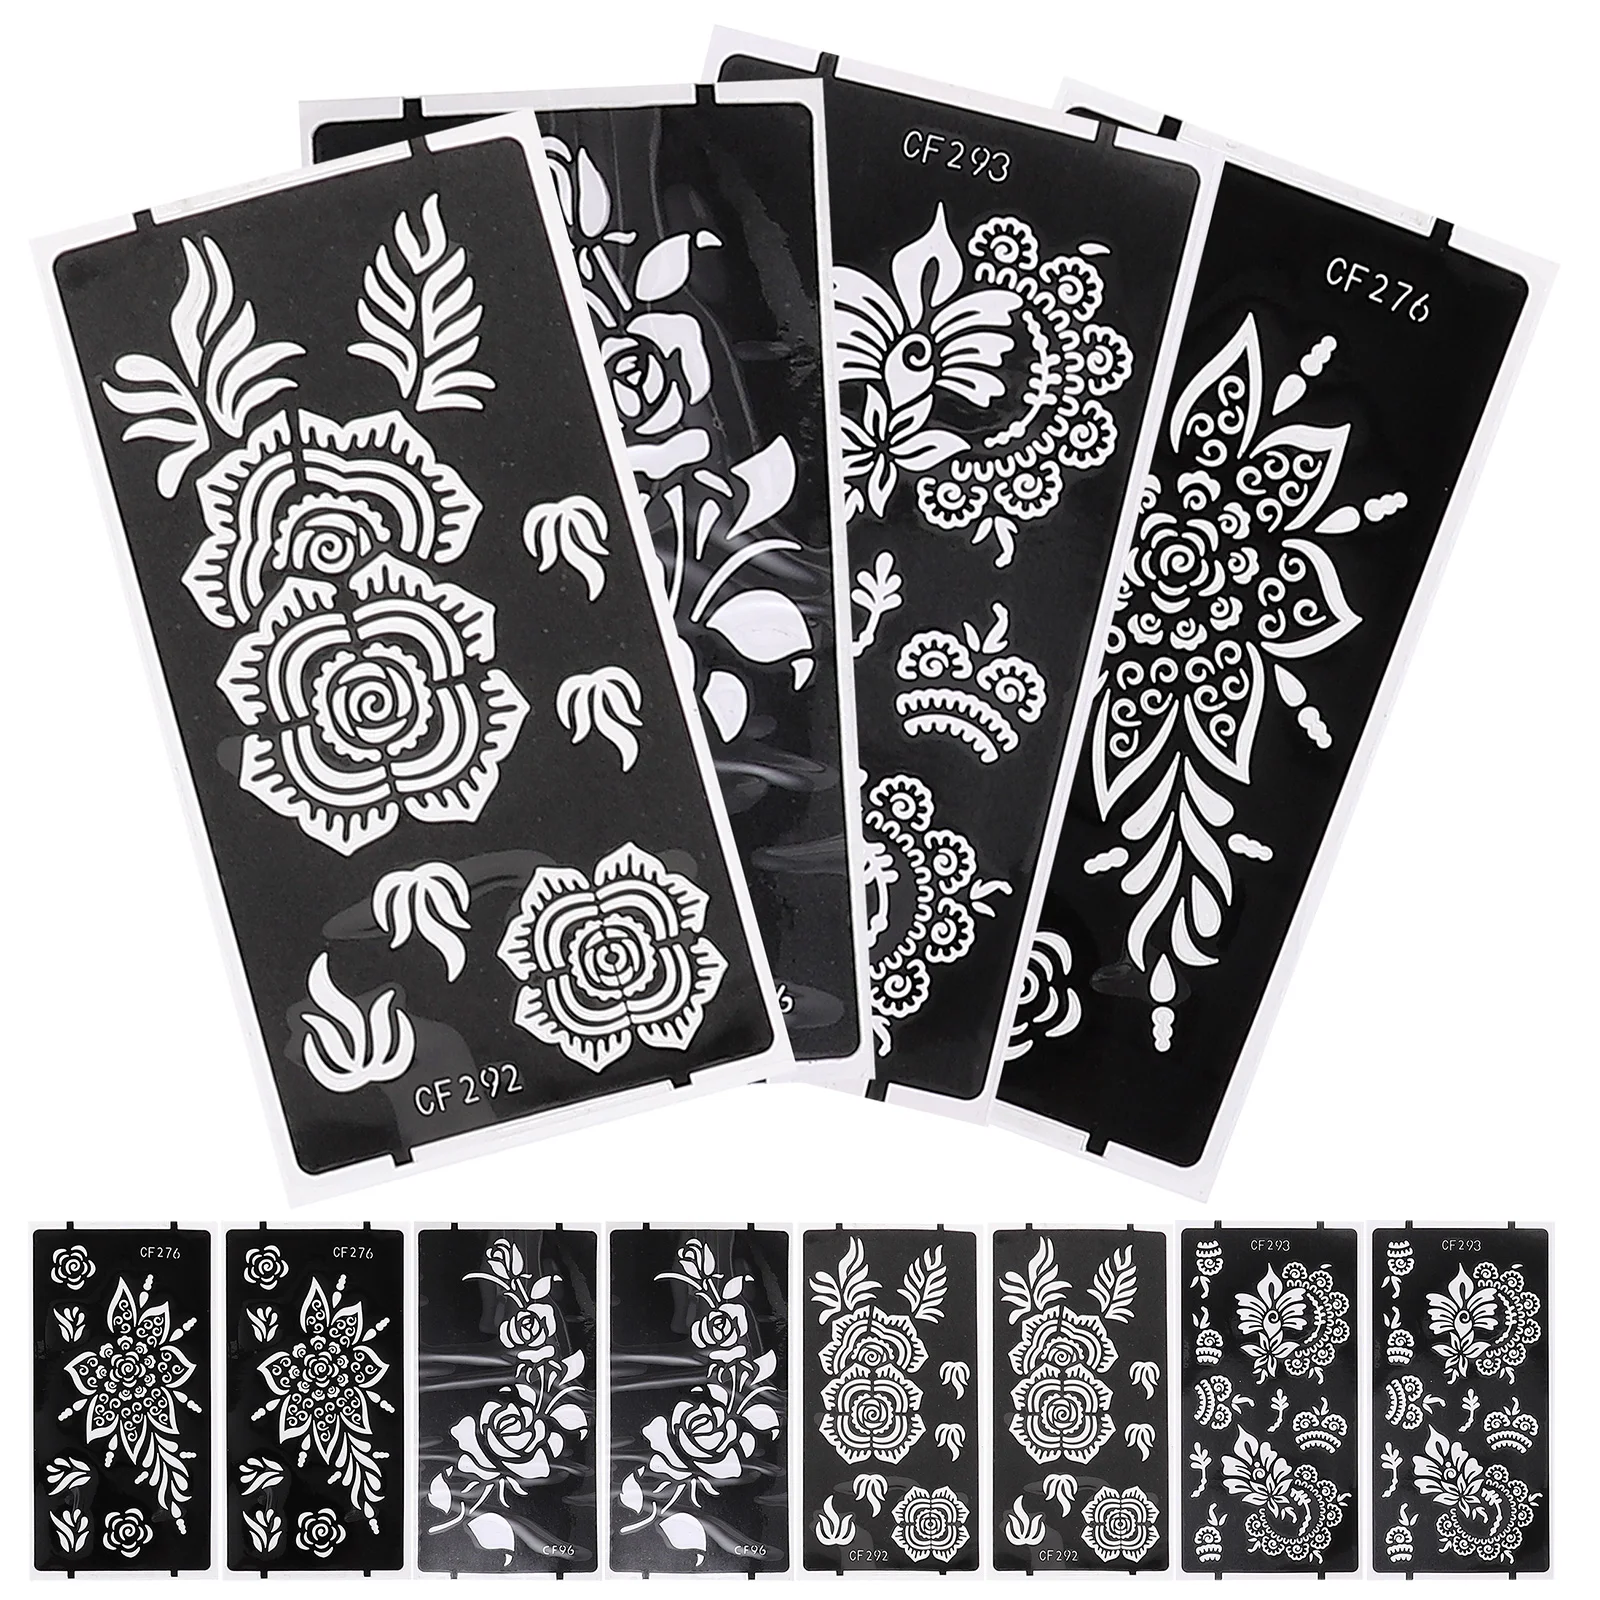 

12 Sheets Tattoo Template Decorative Body Tattoos Temporary Stickers Stencils Black Pvc for Adults